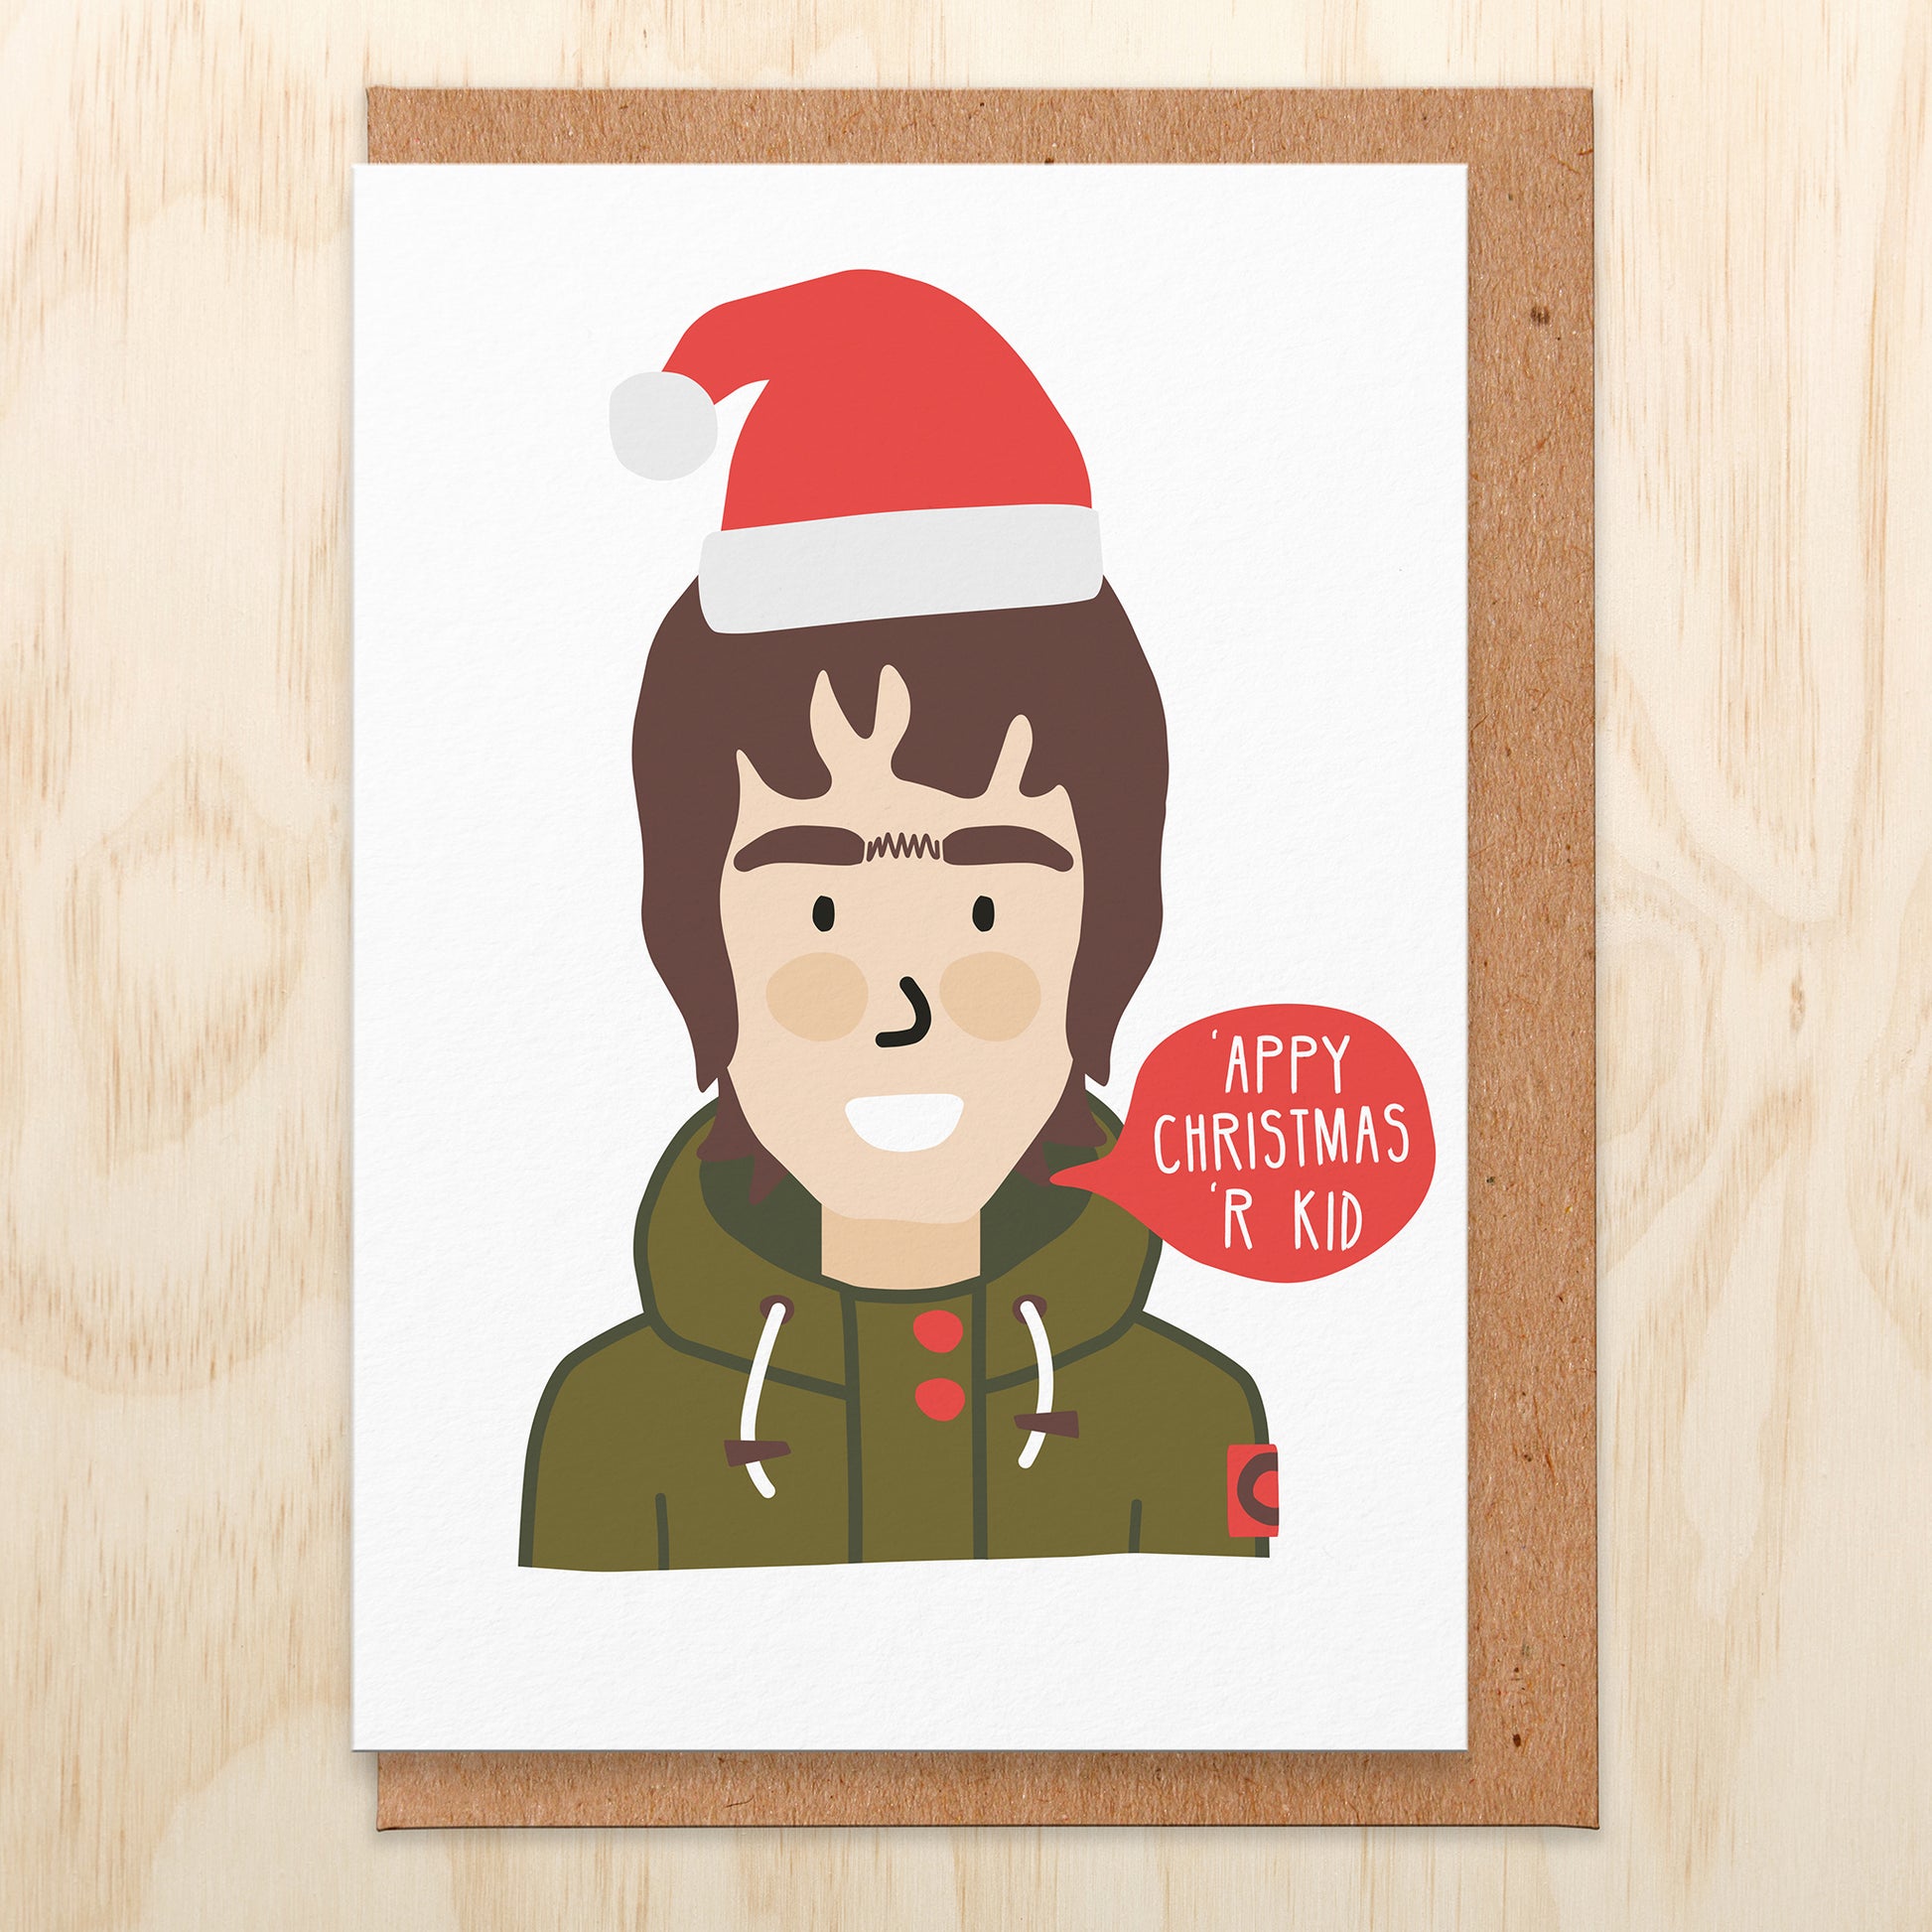 Christmas card with an illustration of LG wearing a Santa hat saying 'appy christmas 'r kid.